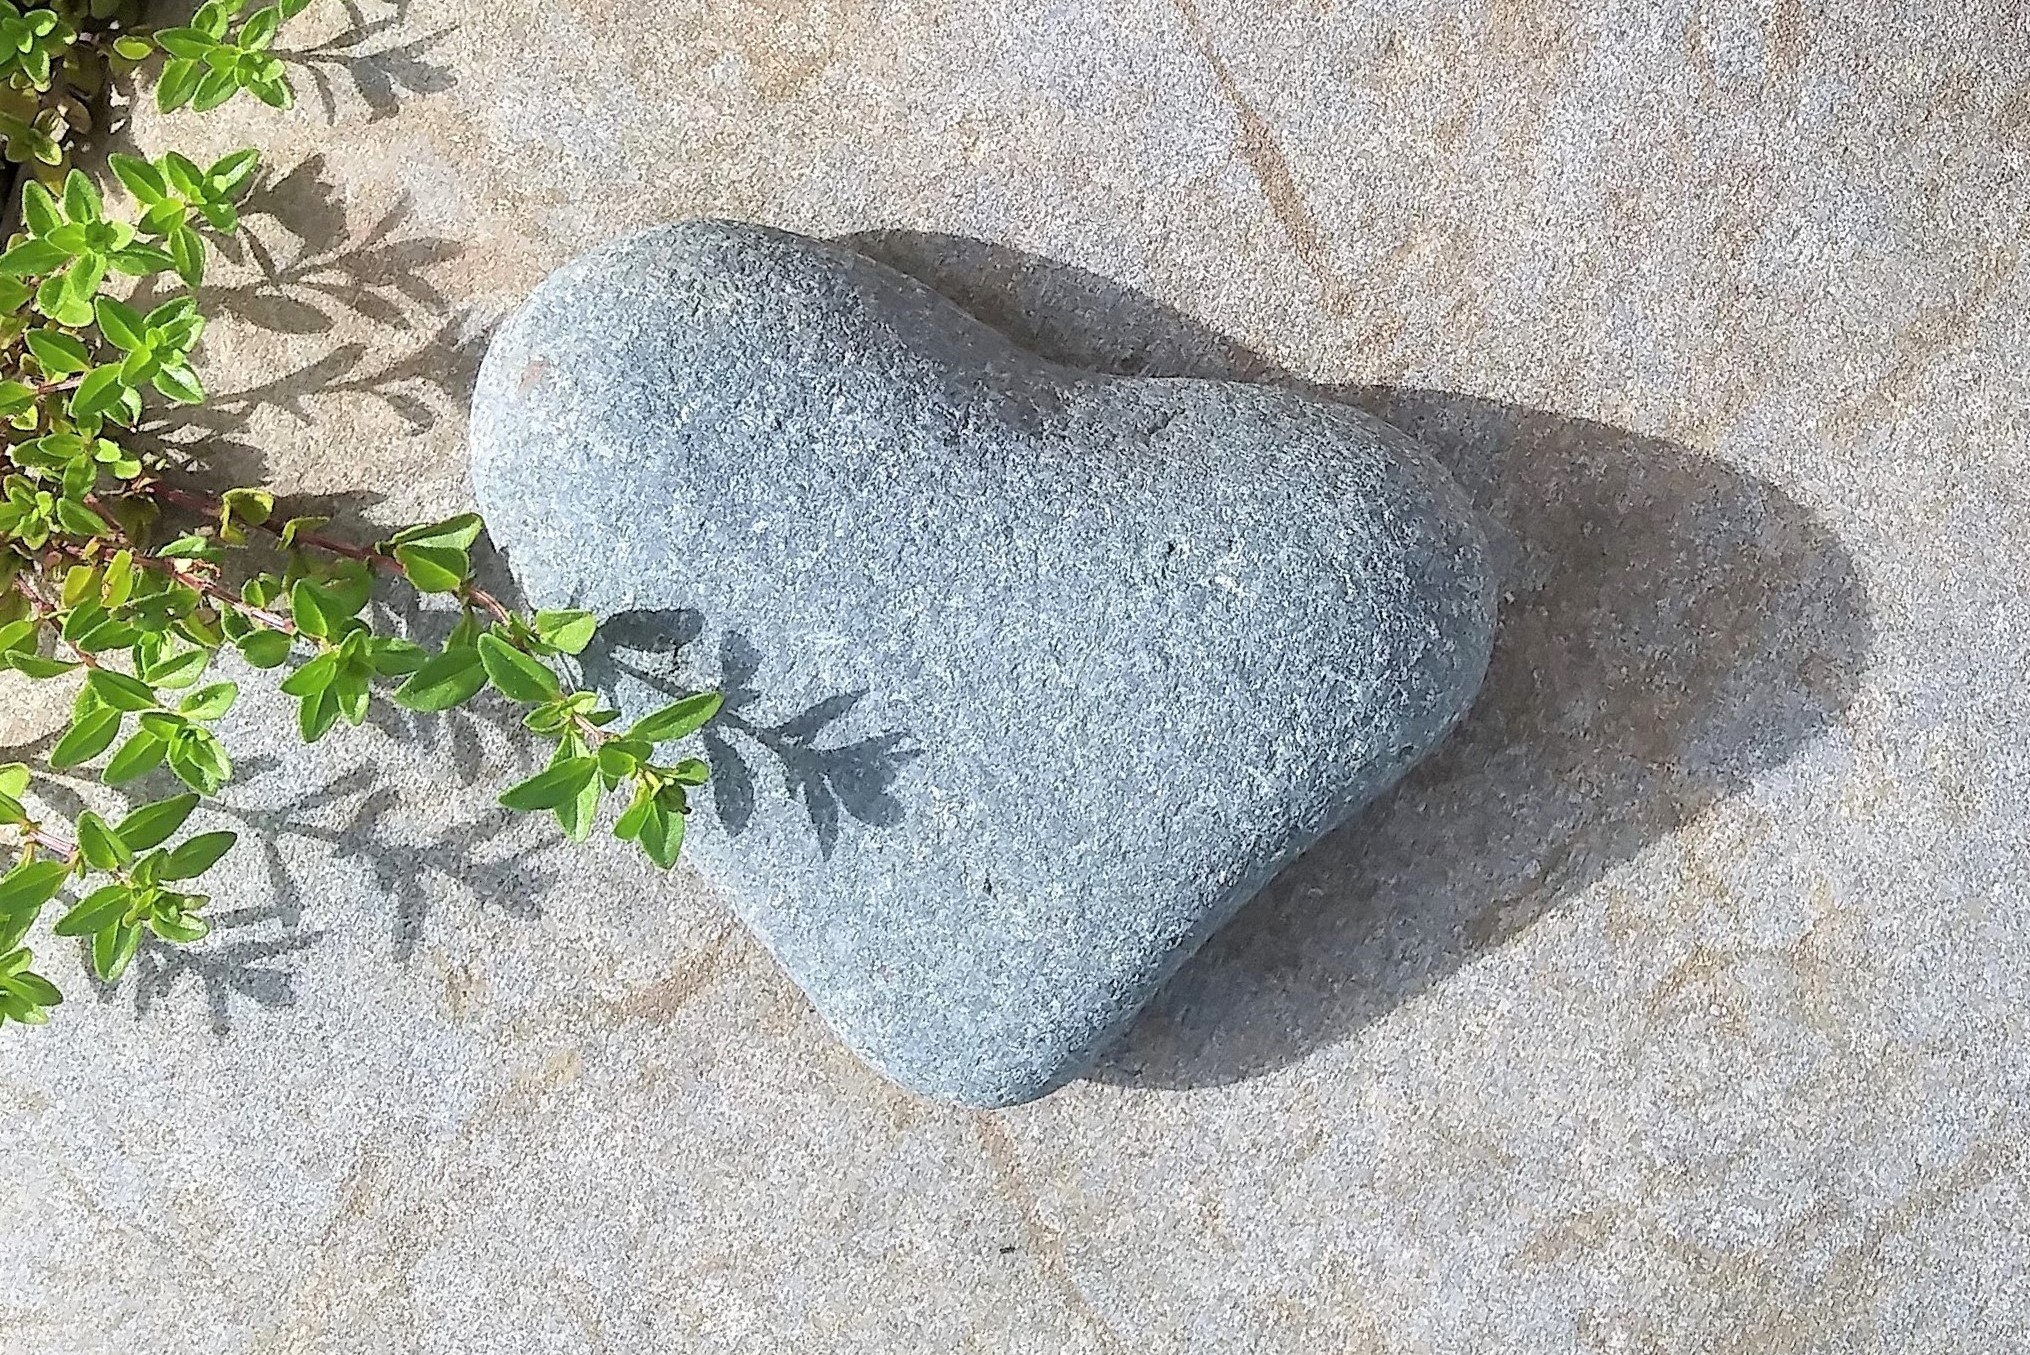 A soft grey heart shaped rock is sitting on a pink colored much wider bedrock with branches of tiny greenery all around.